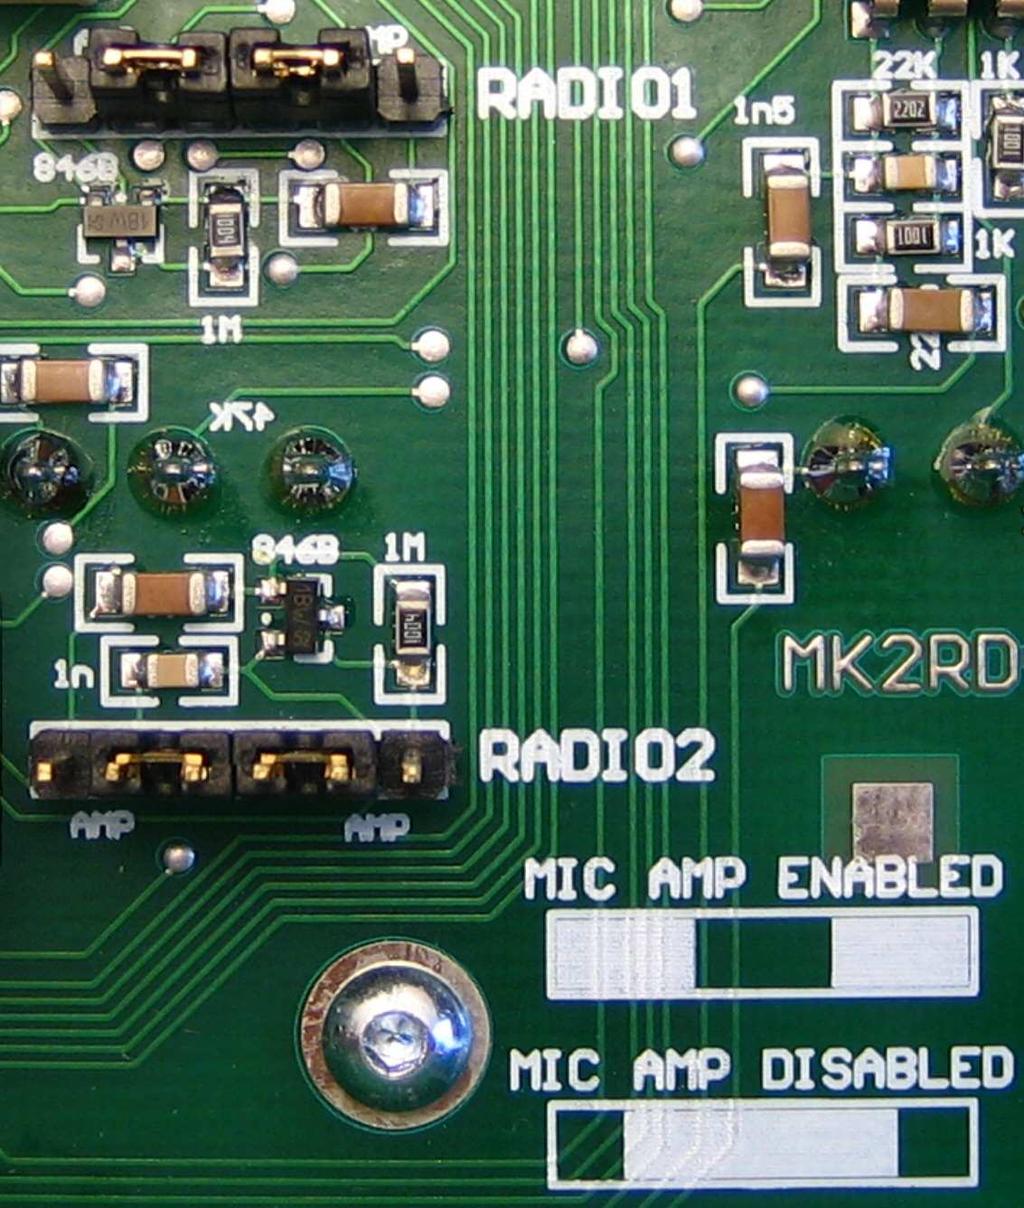 6 - MK2R OPERATION Setting Audio Levels For optimum operation in Voice and AFSK Digital modes, MK2R and Router requires proper drive levels.